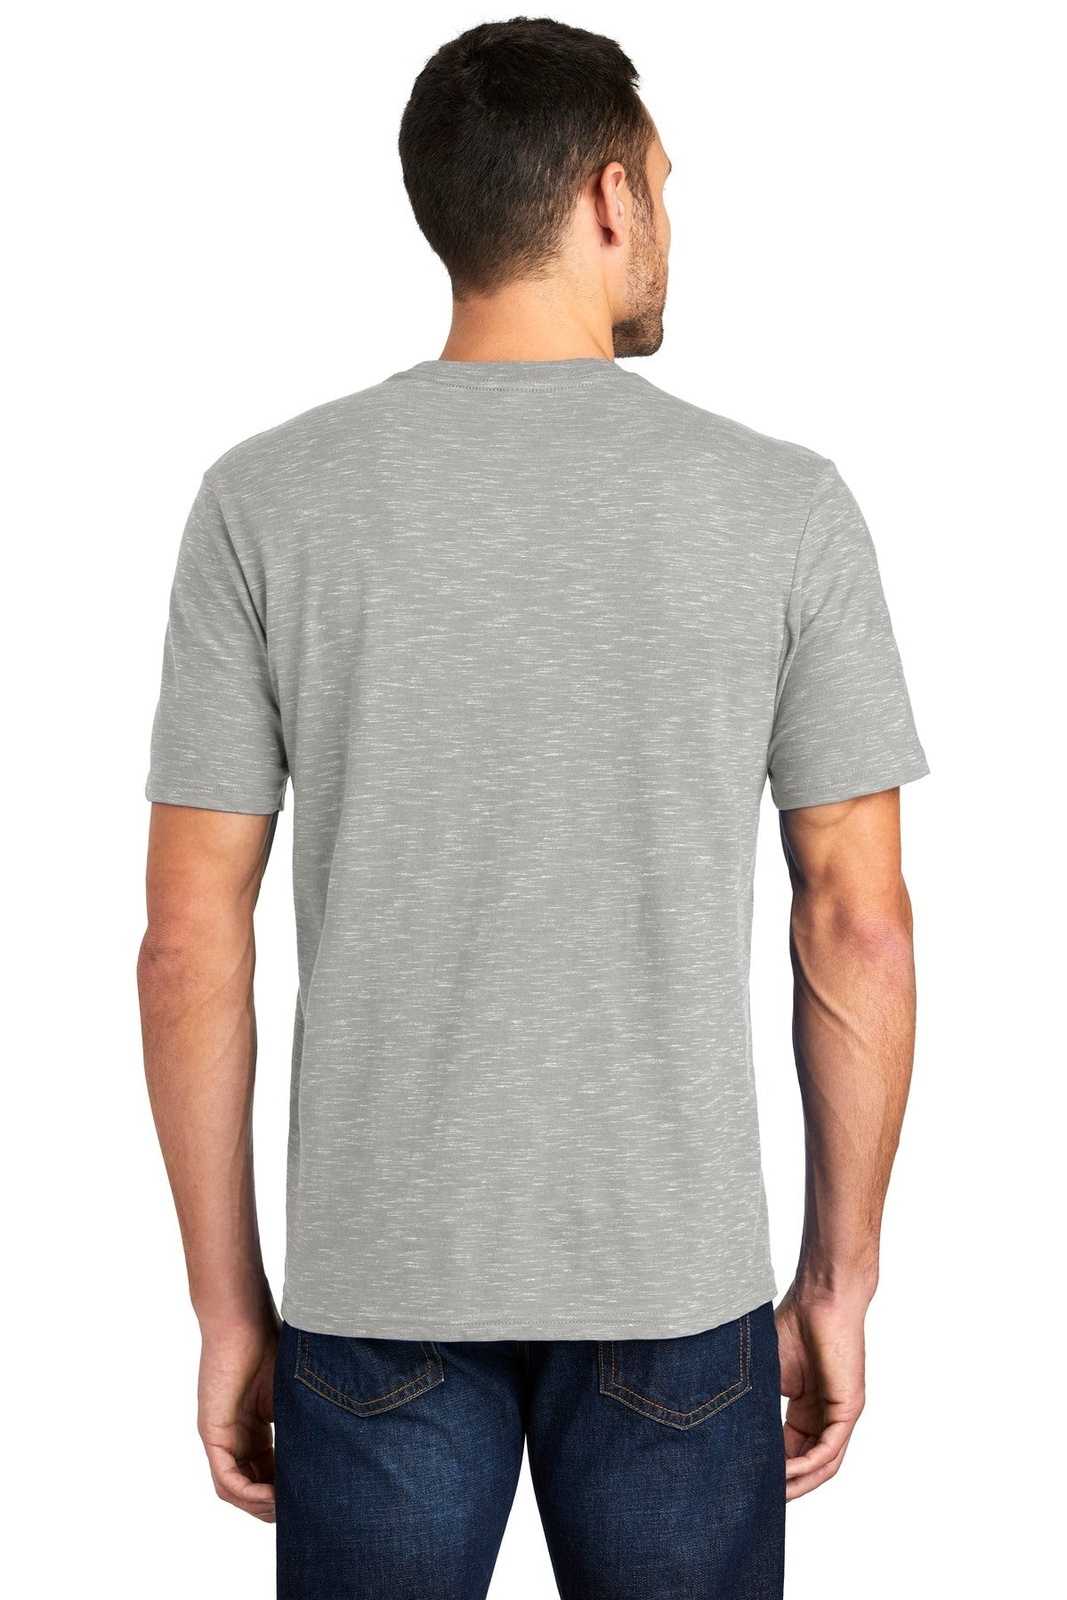 District DT564 Medal Tee - Light Gray - HIT a Double - 1